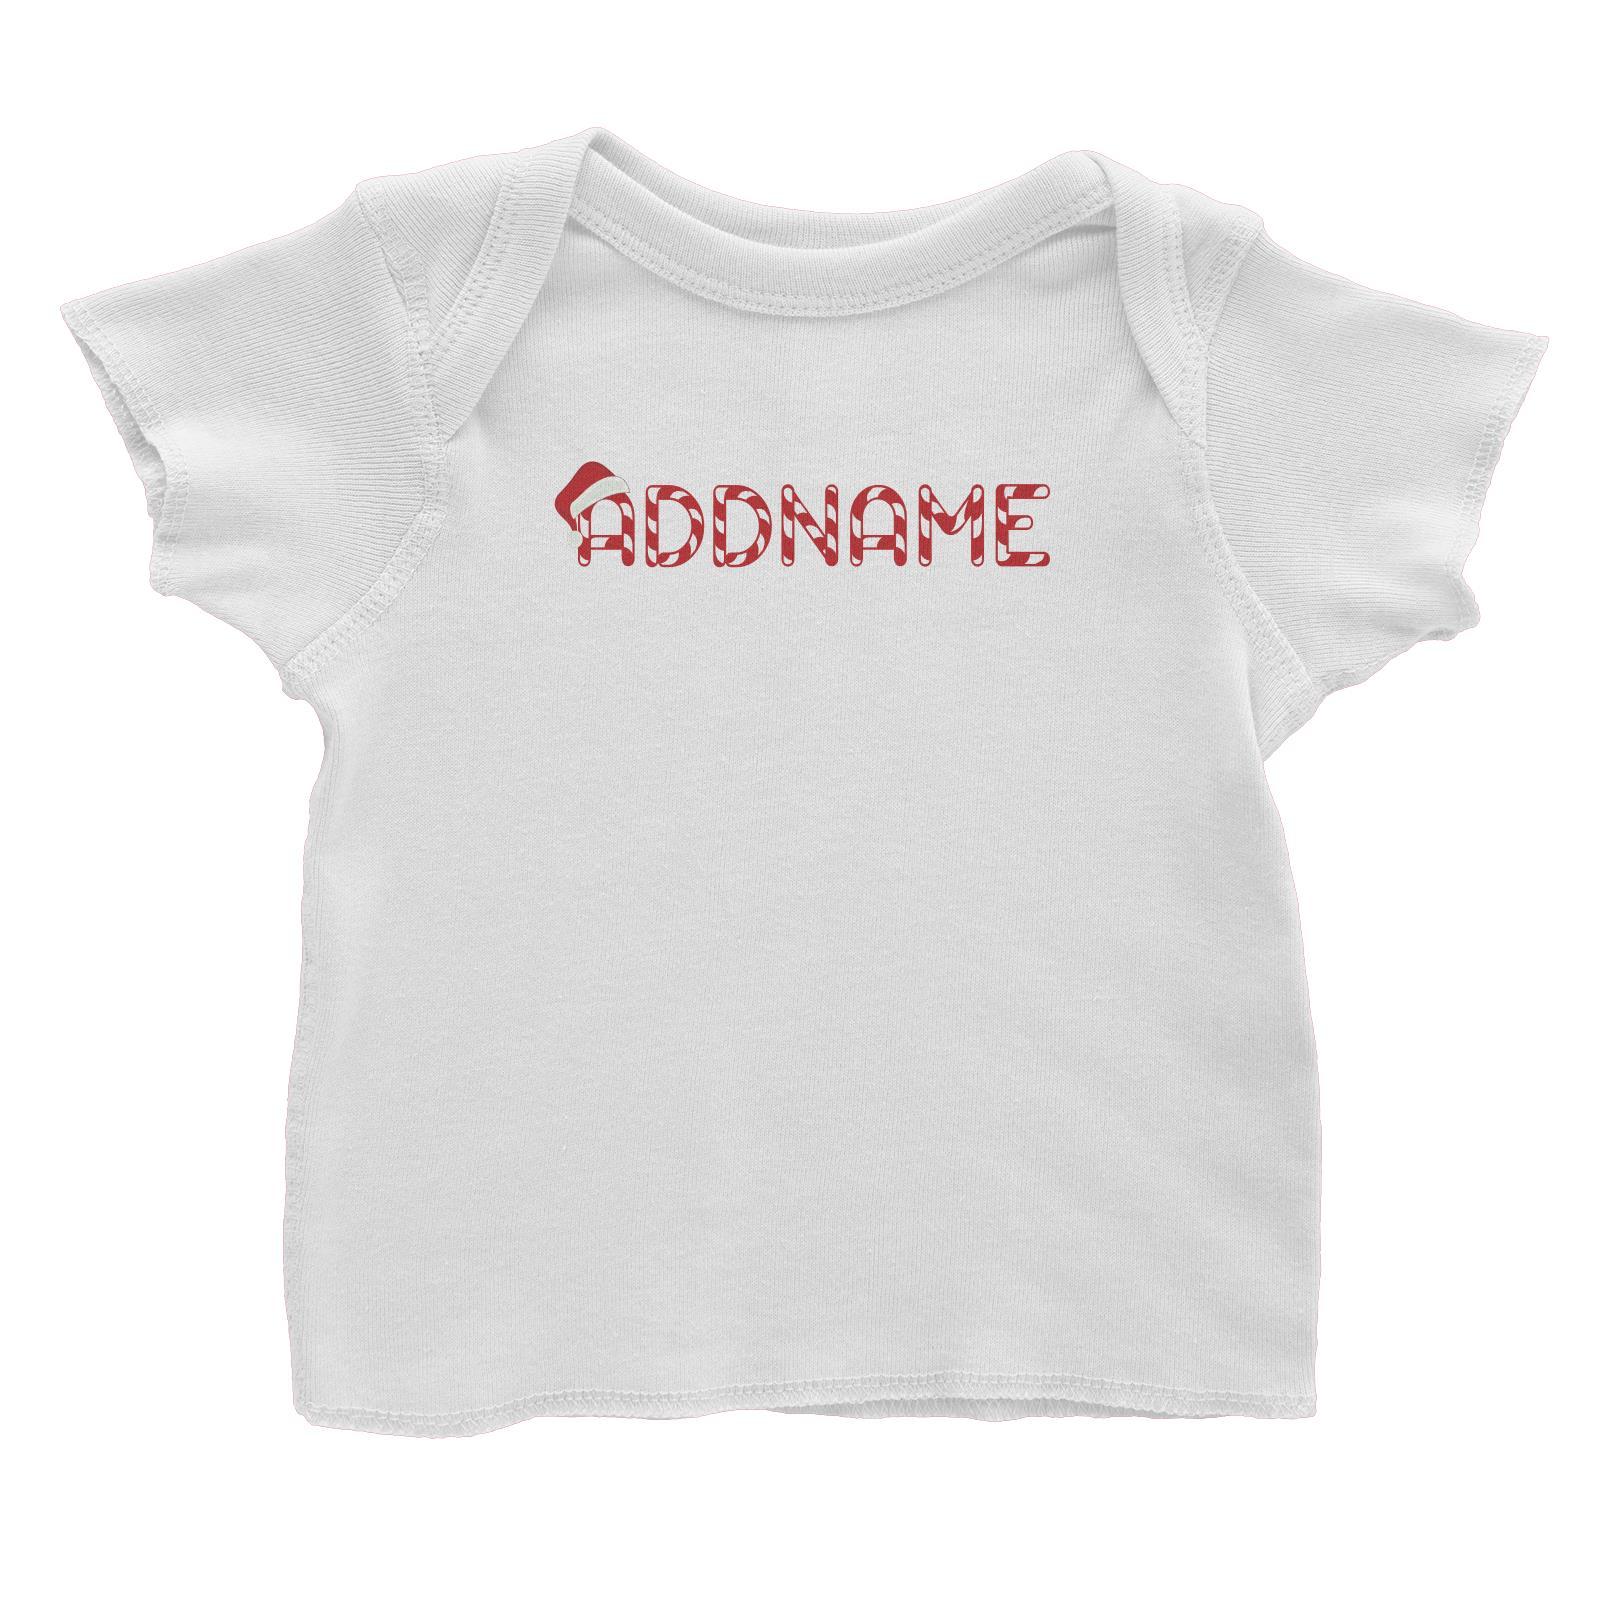 Candy Cane Alphabet Addname with Santa Hat Baby T-Shirt Christmas Matching Family Personalizable Designs Lettering